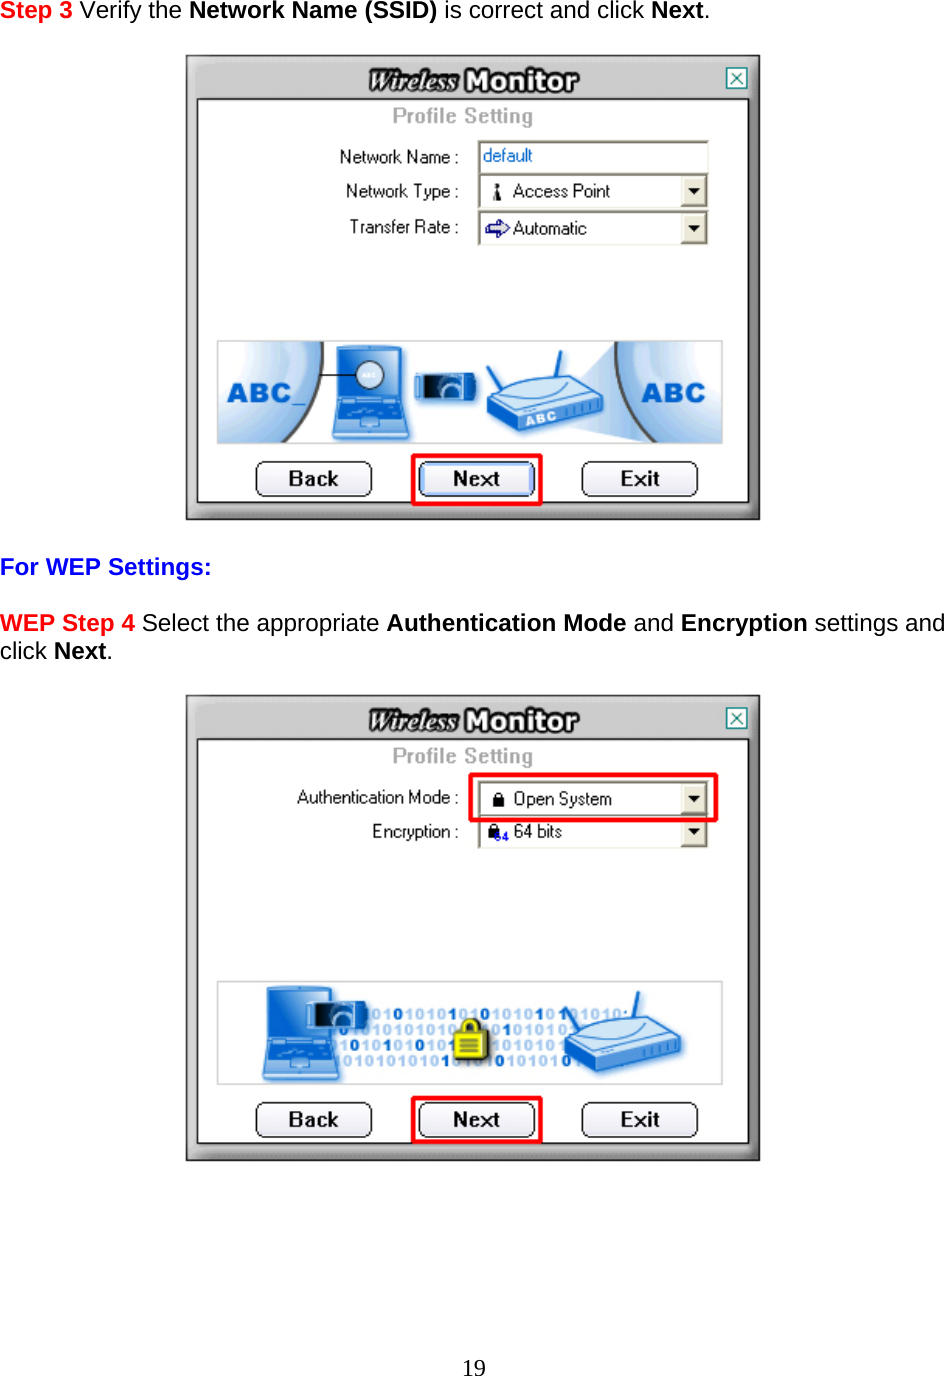 19 Step 3 Verify the Network Name (SSID) is correct and click Next.    For WEP Settings:  WEP Step 4 Select the appropriate Authentication Mode and Encryption settings and click Next.        